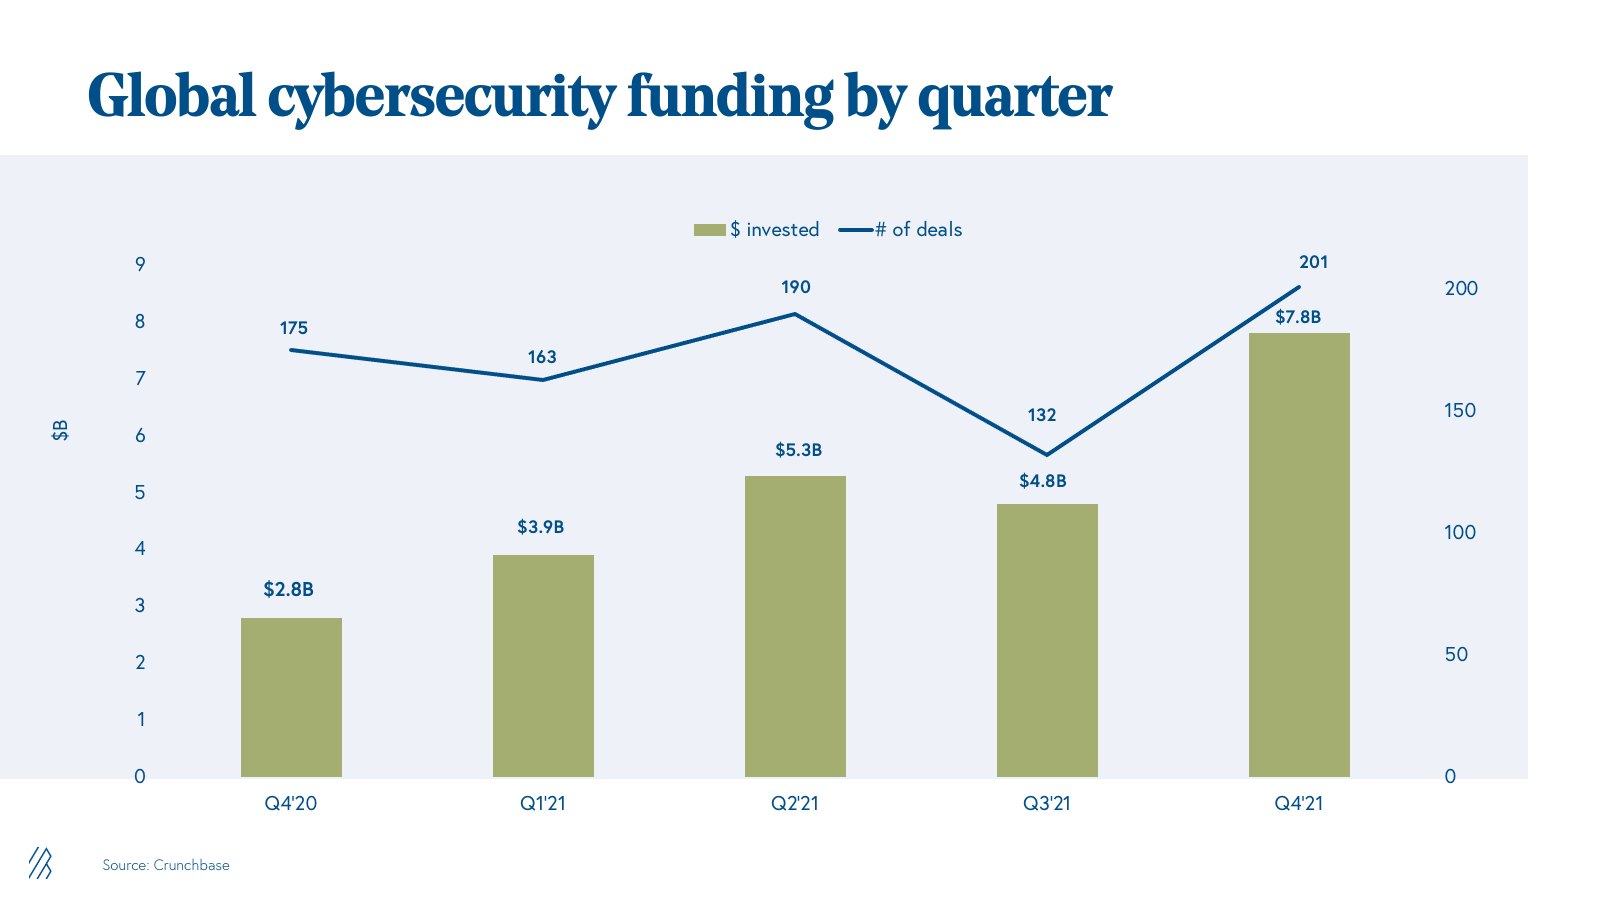 Global cybersecurity funding by quarter